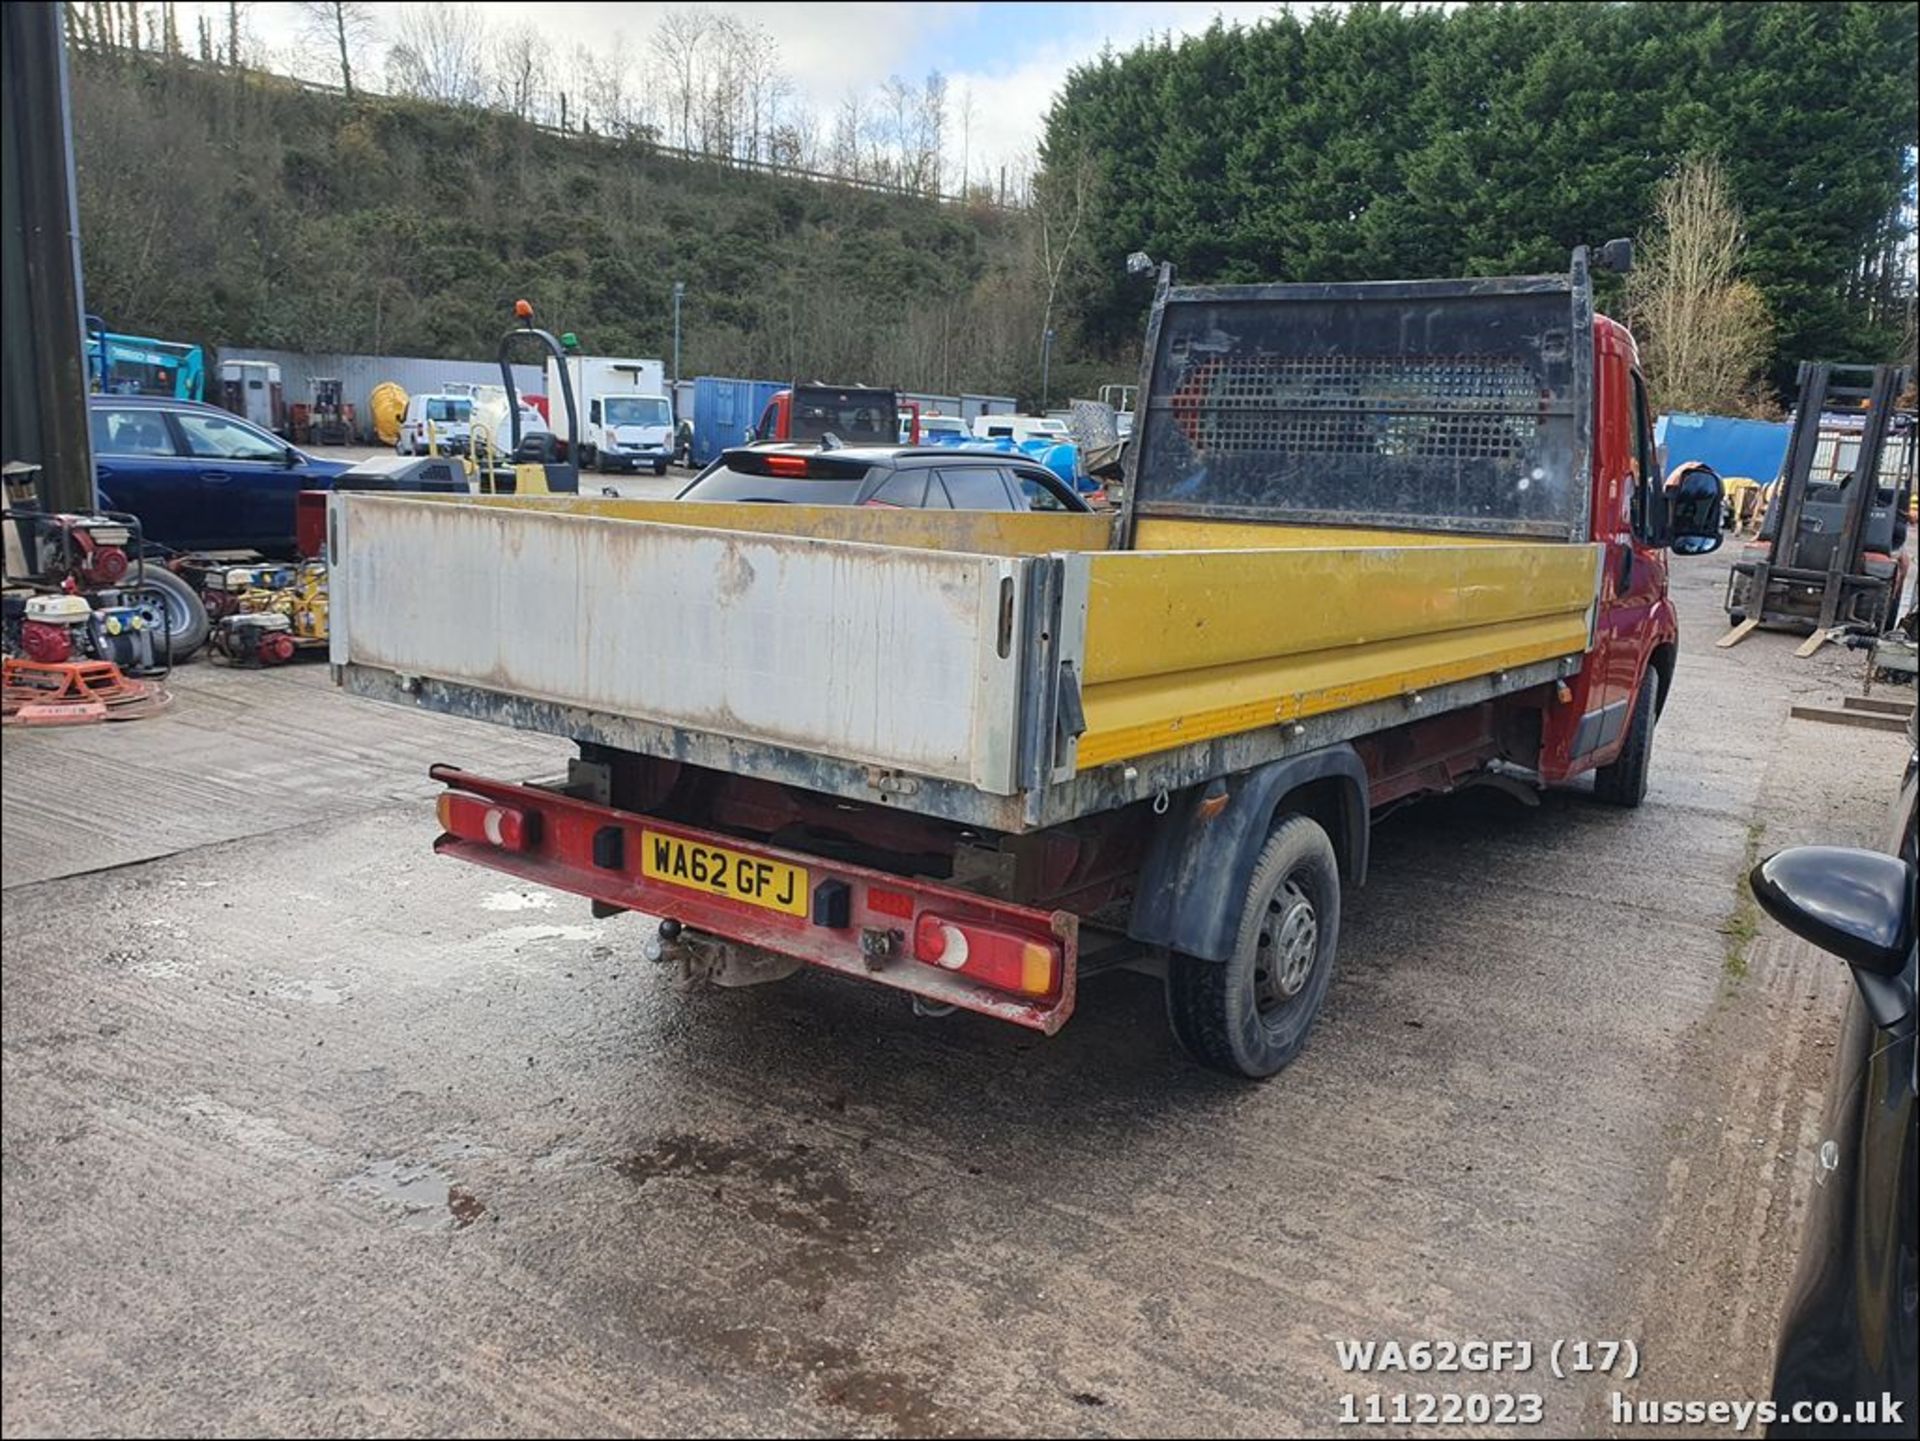 12/62 FIAT DUCATO 35 MULTIJET - 2287cc 2.dr Flat Bed (Red) - Image 18 of 52